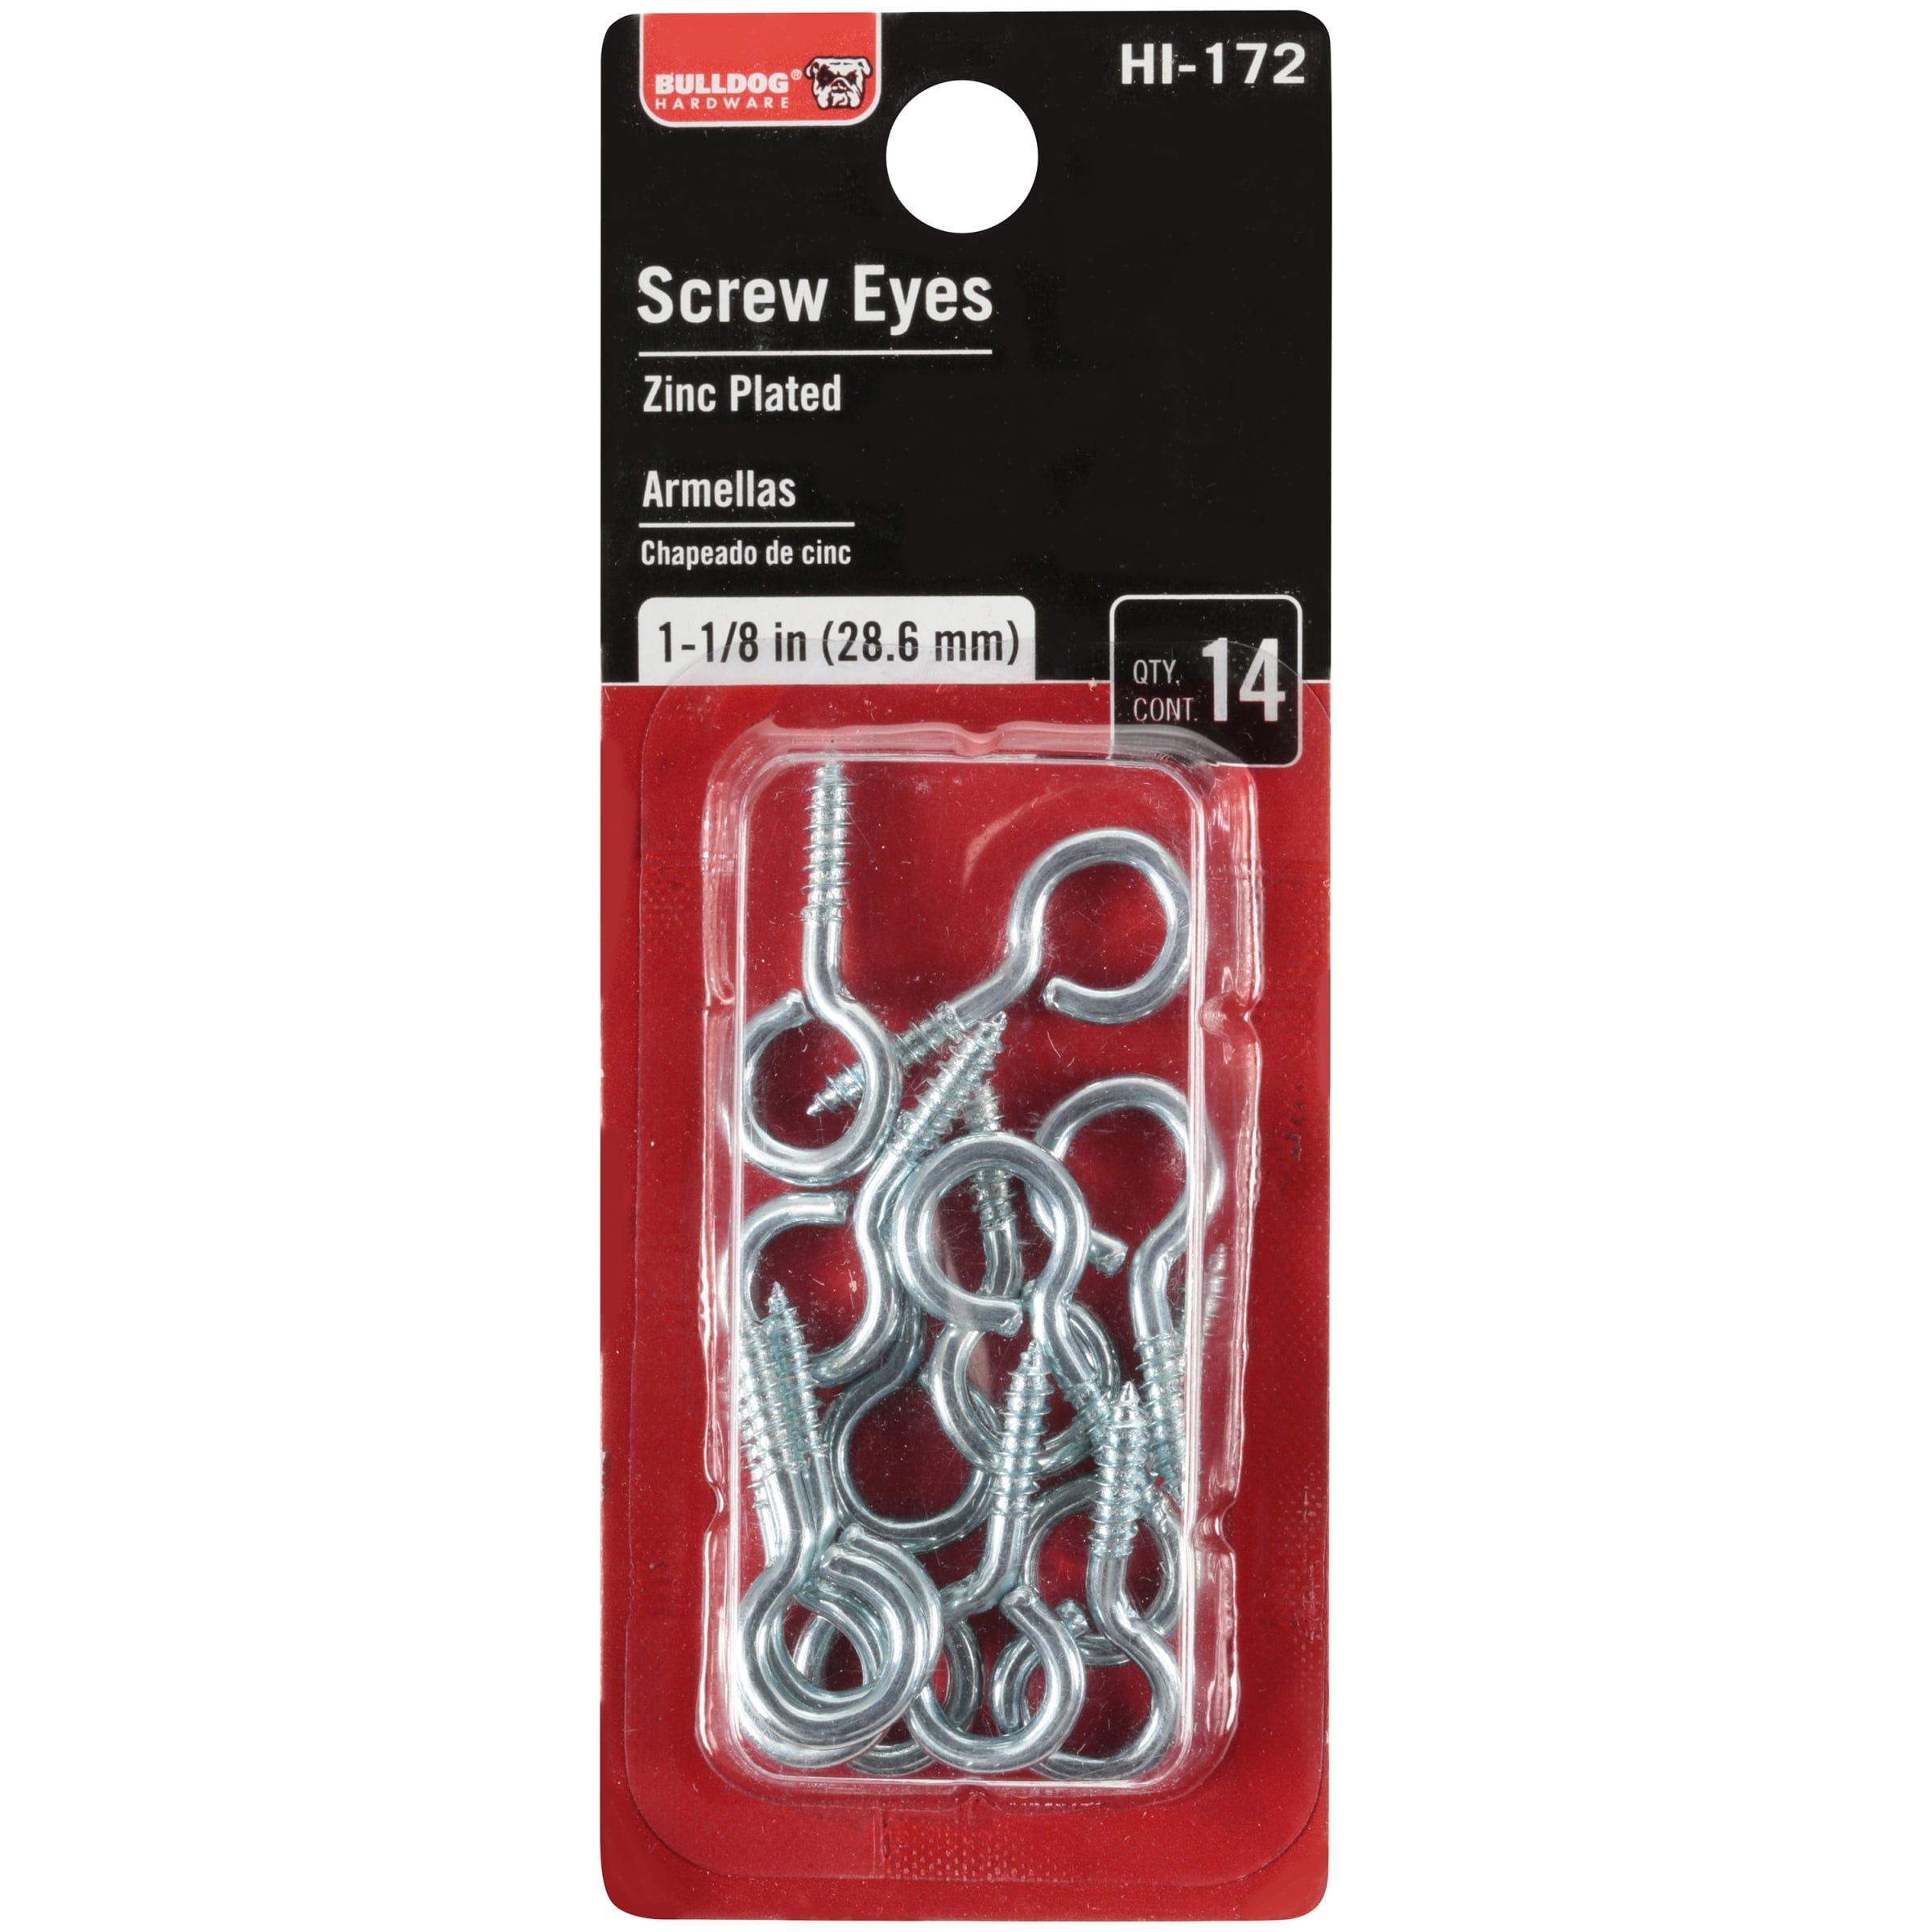 ADS Small Screw Eye 214 1/2 Screw Eyes - 200 Pack – ADS ART DISPLAY SYSTEMS